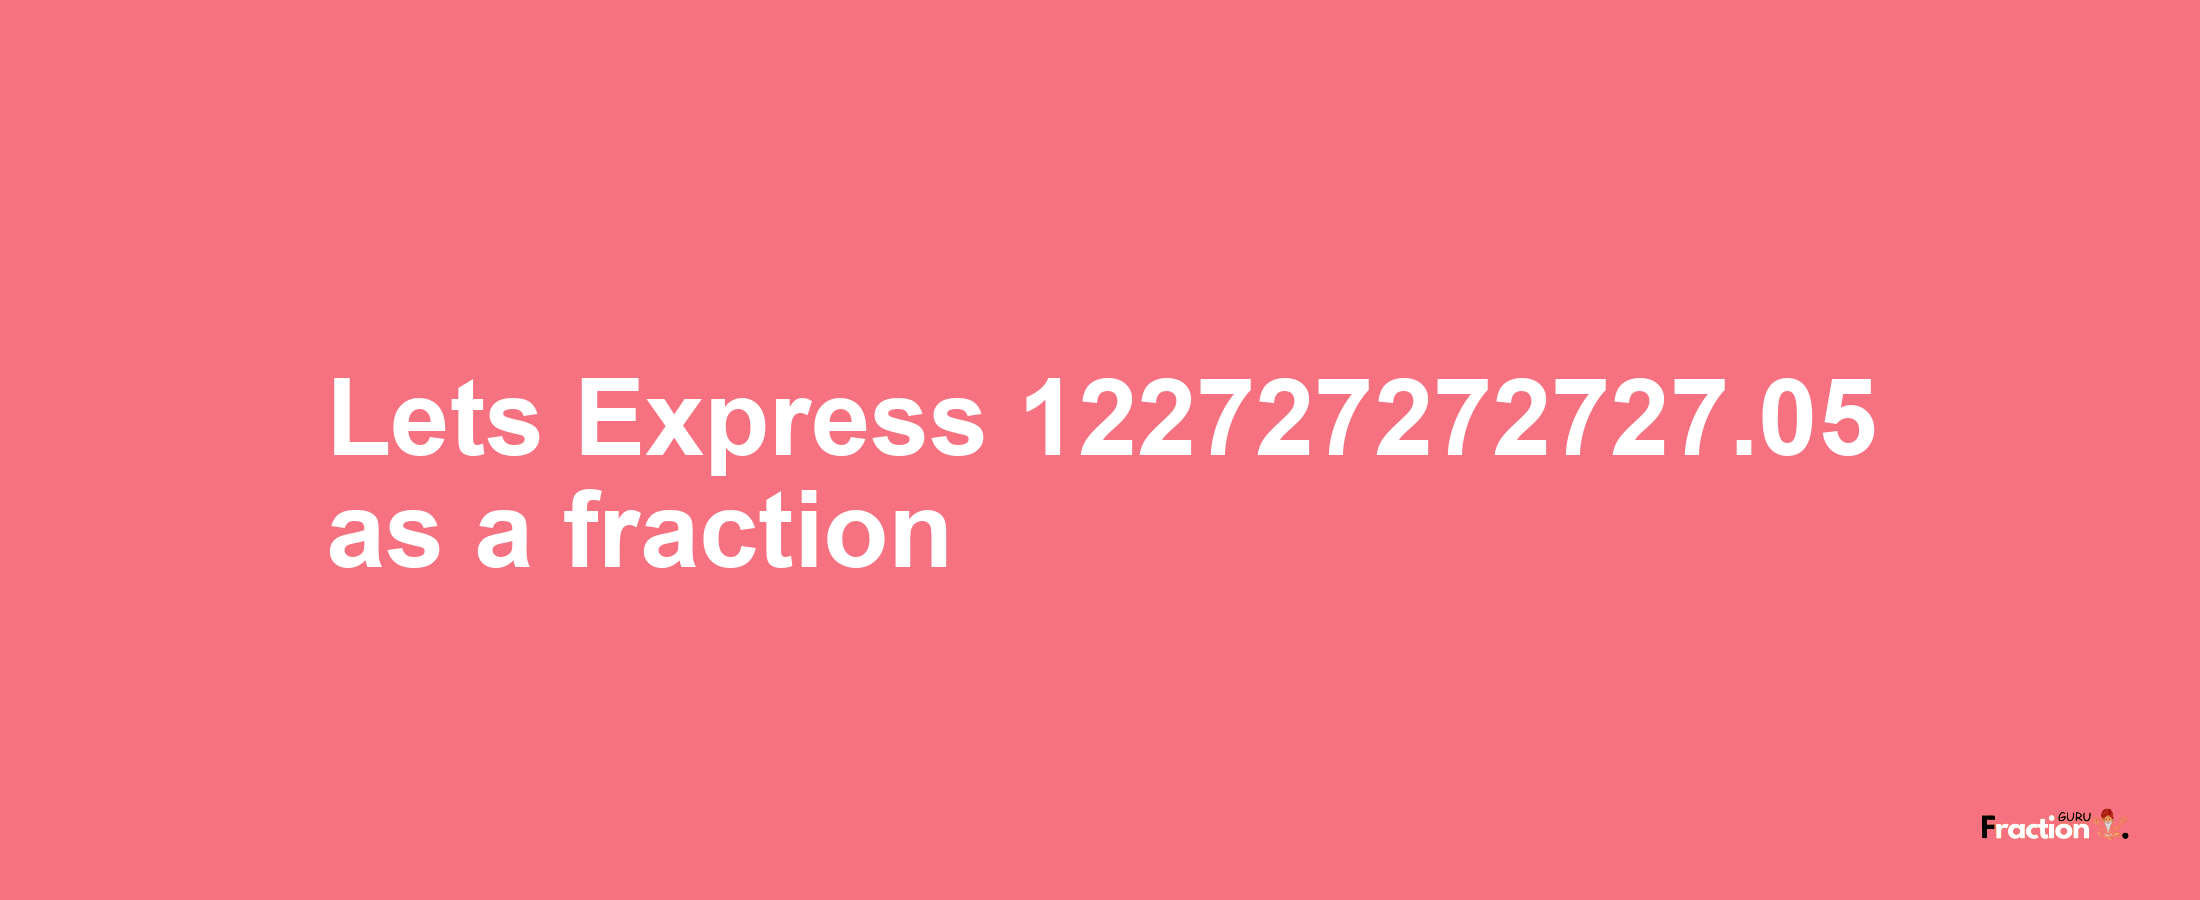 Lets Express 122727272727.05 as afraction